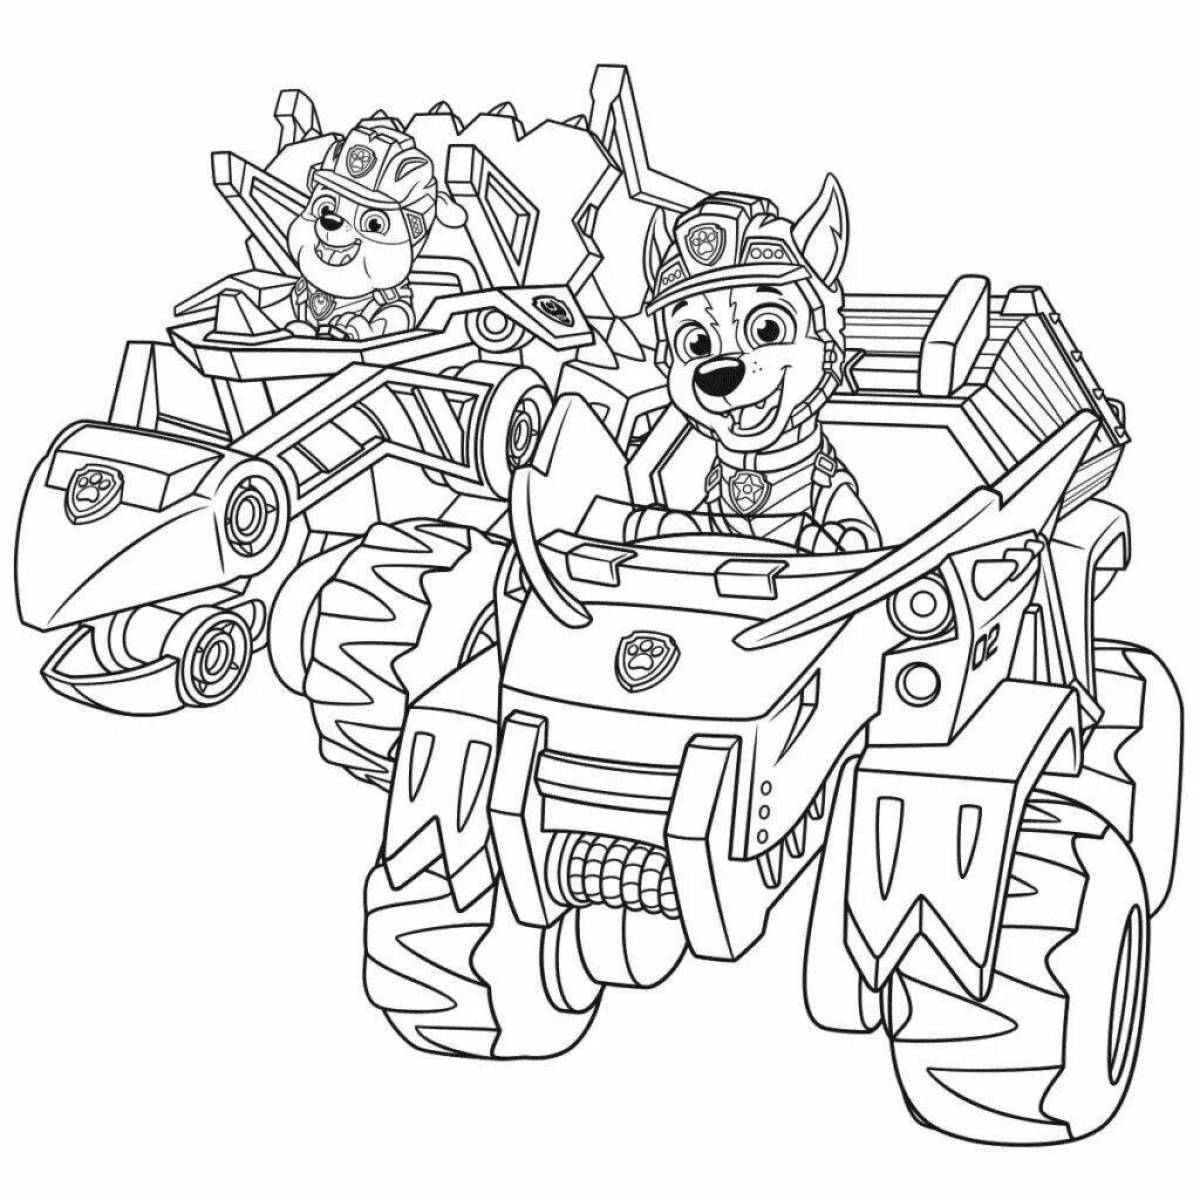 Coloring page funny paw patrol puppies